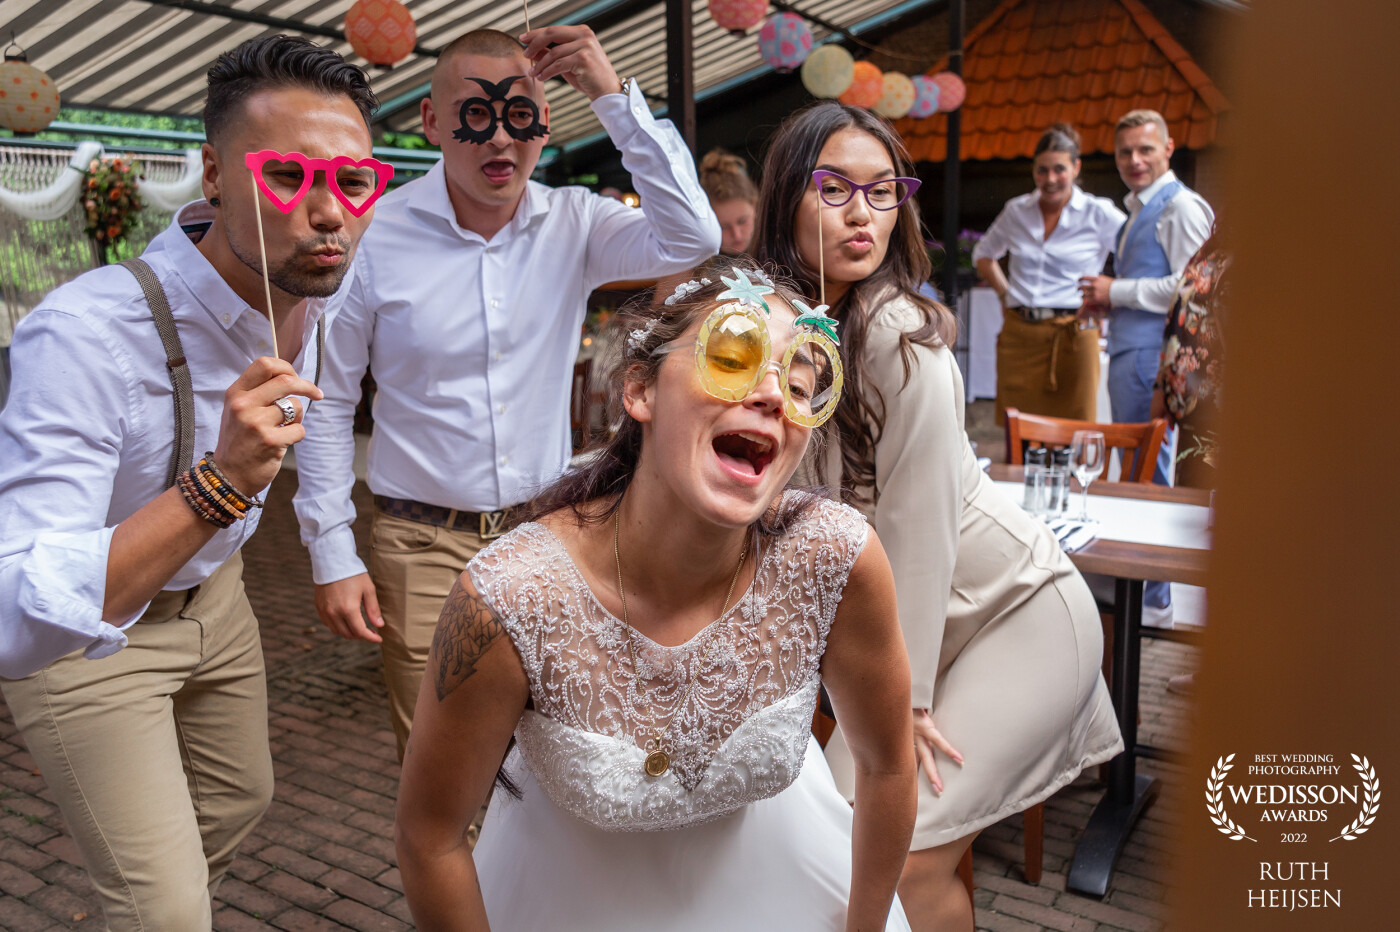 A photo booth at your wedding is always a guaranteed success, especially if some have already been drinking. The reserve disappears and with it the shyness in front of the camera. In this case, the bride, her sister and followers go wild in front of the photo booth and from a distance the groom observes the pleasant scene.